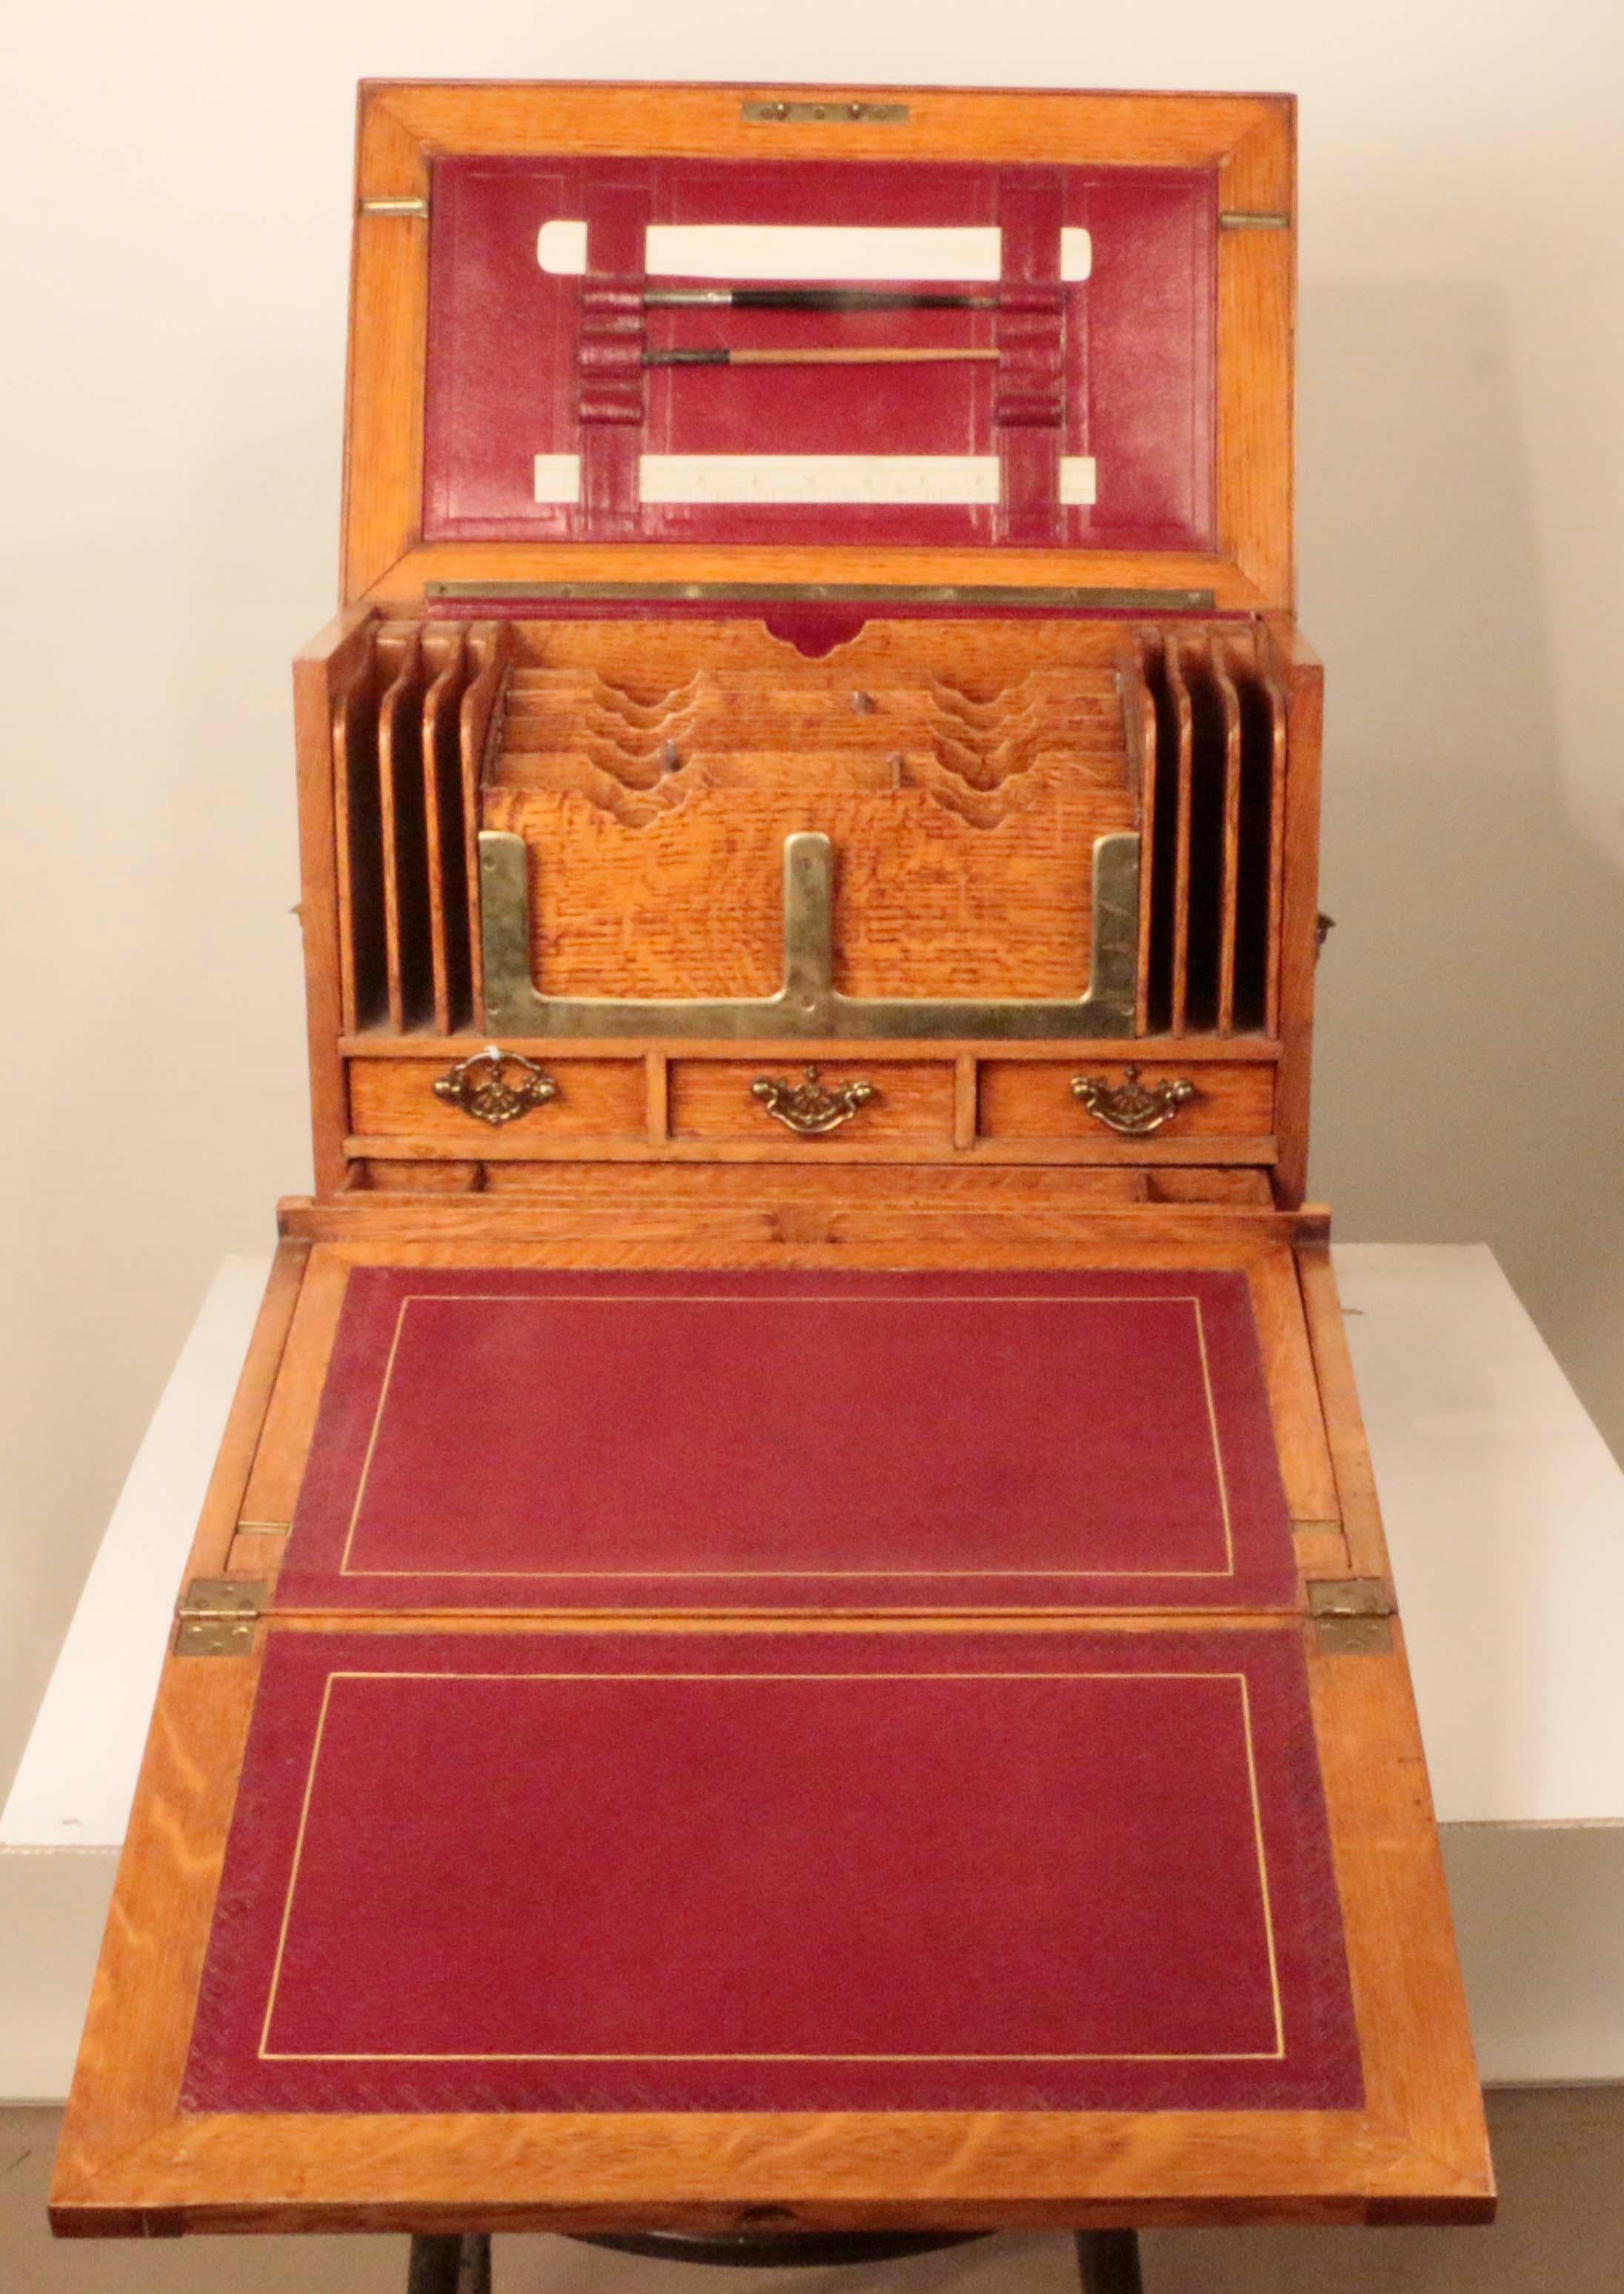 This is a kind of office compactum. Set it down on a table, open it up and start working. The rising top reveals ruler, and pens and the original blotter. As the writing slope is folded out, the red leather and tooled gilt surface comes into view